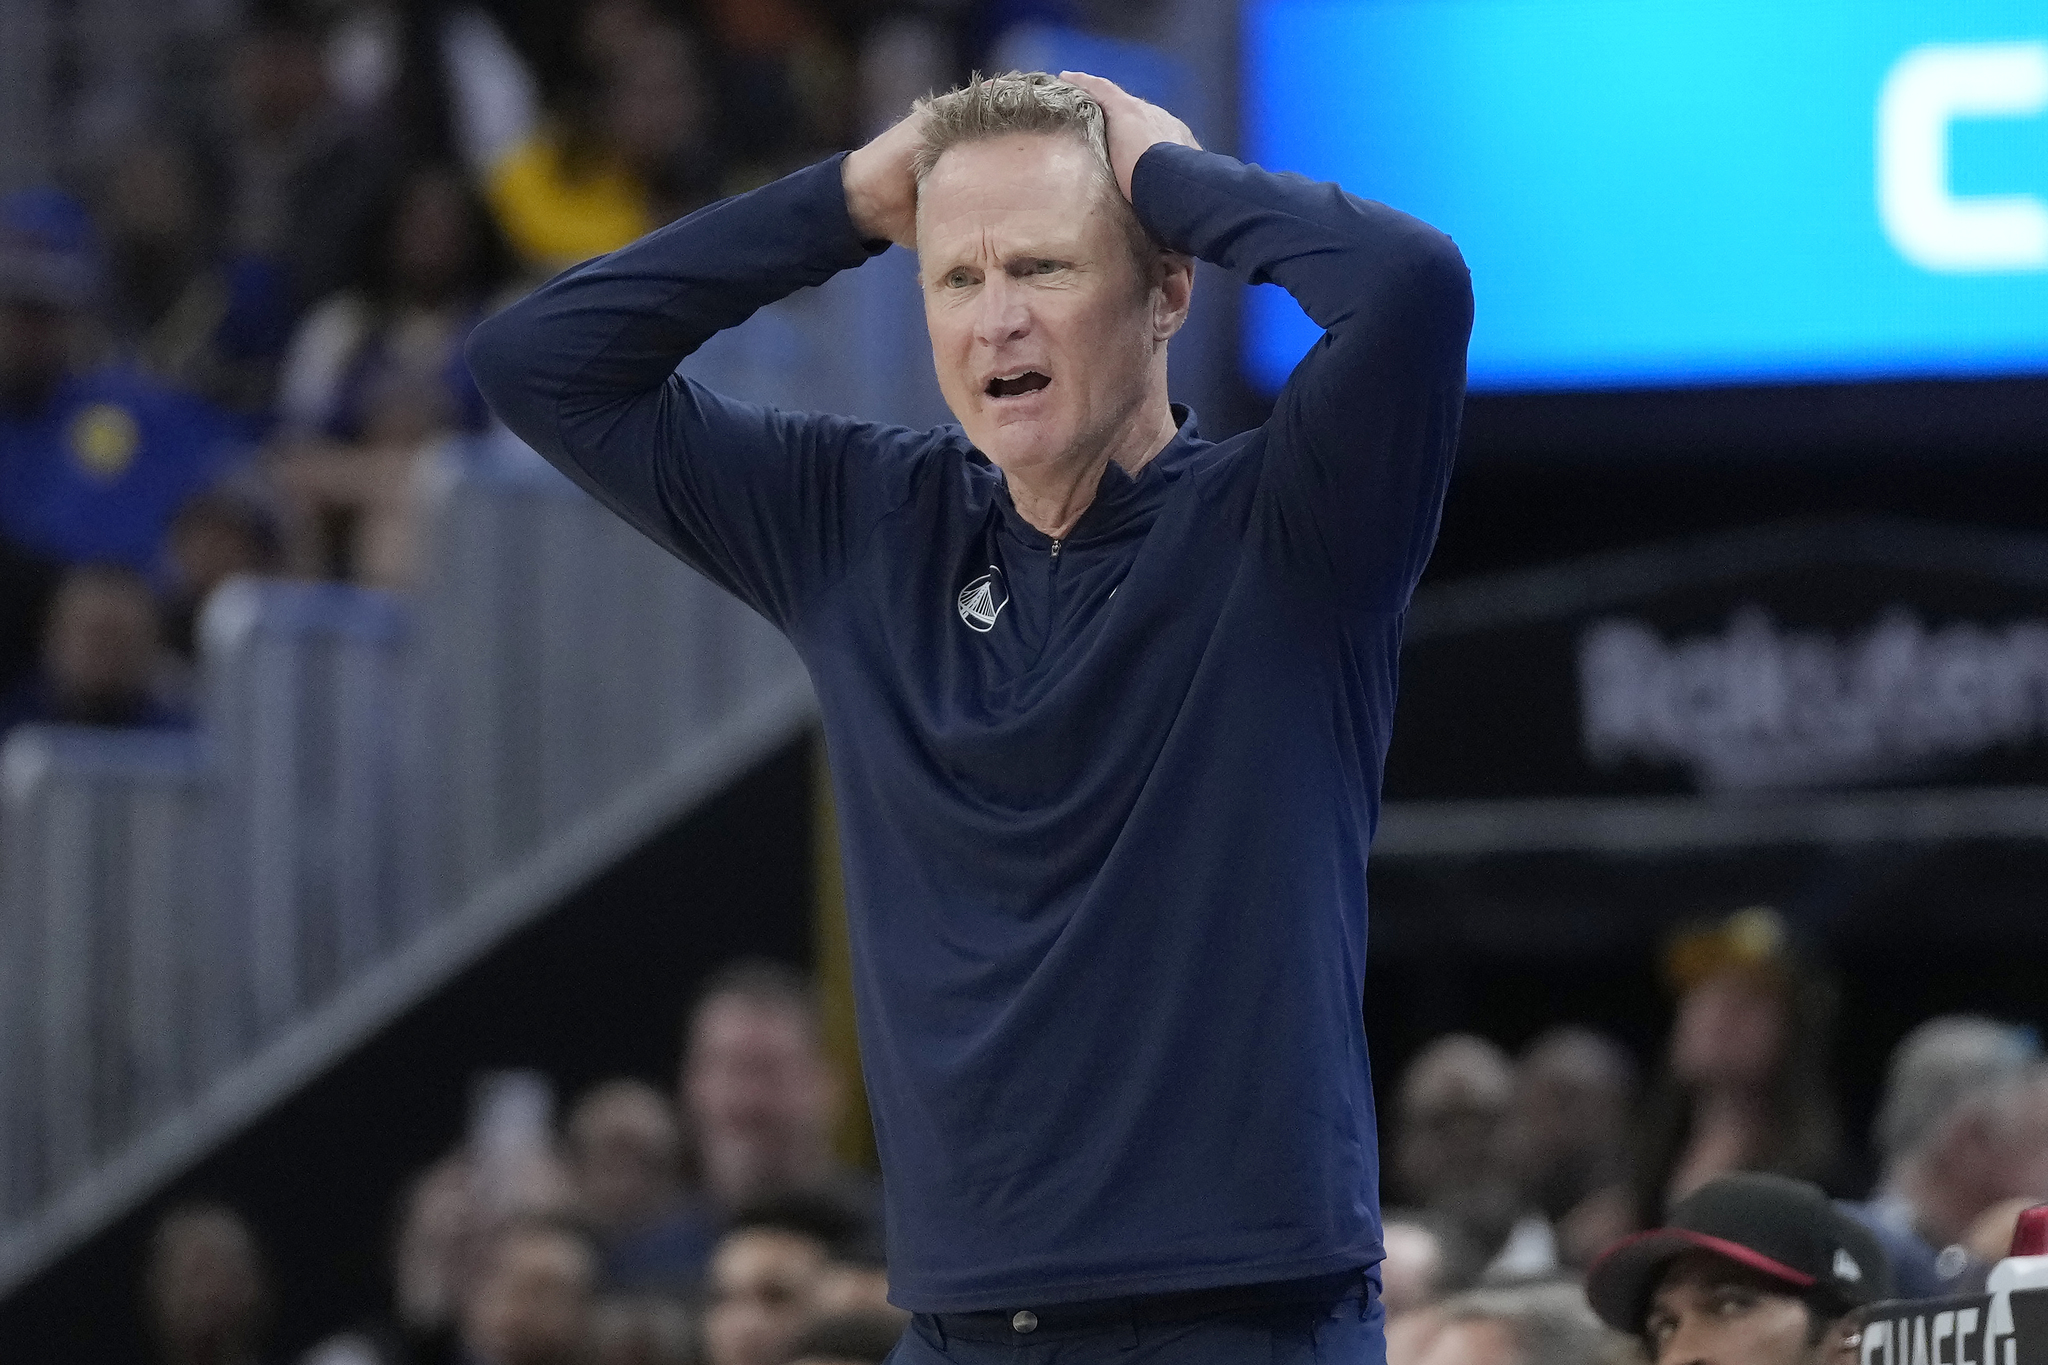 Steve Kerr was distraught after the Warriors gave up a 22-point lead to the Clippers on Saturday.